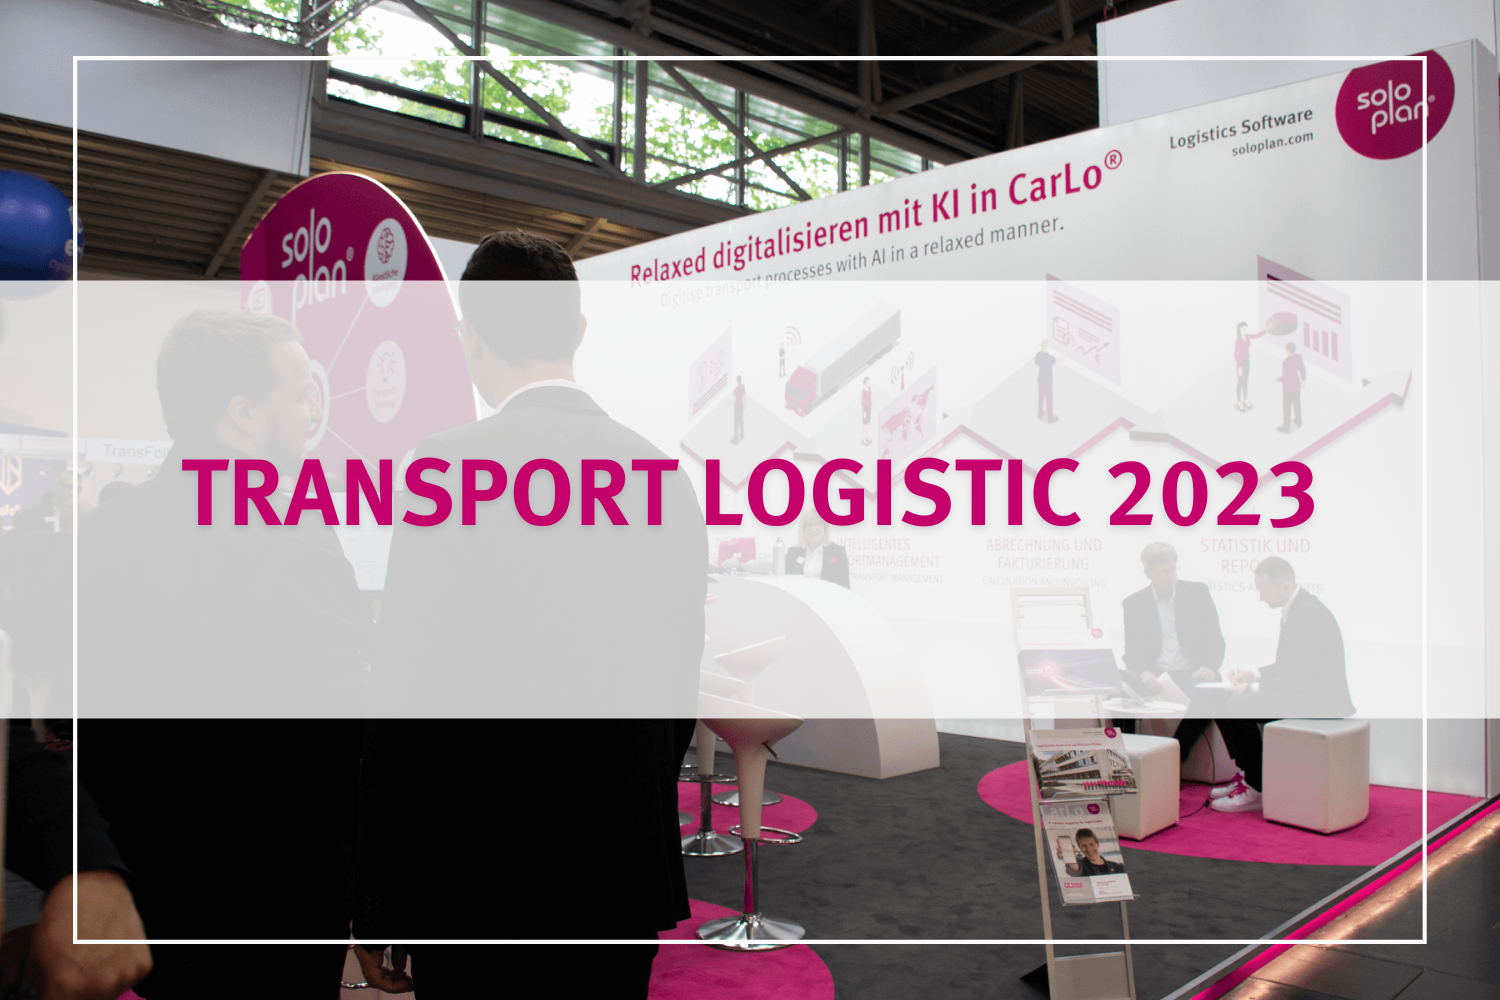 CarLo – the driving force of digitalisation and innovation of the future at transport logistic 2023